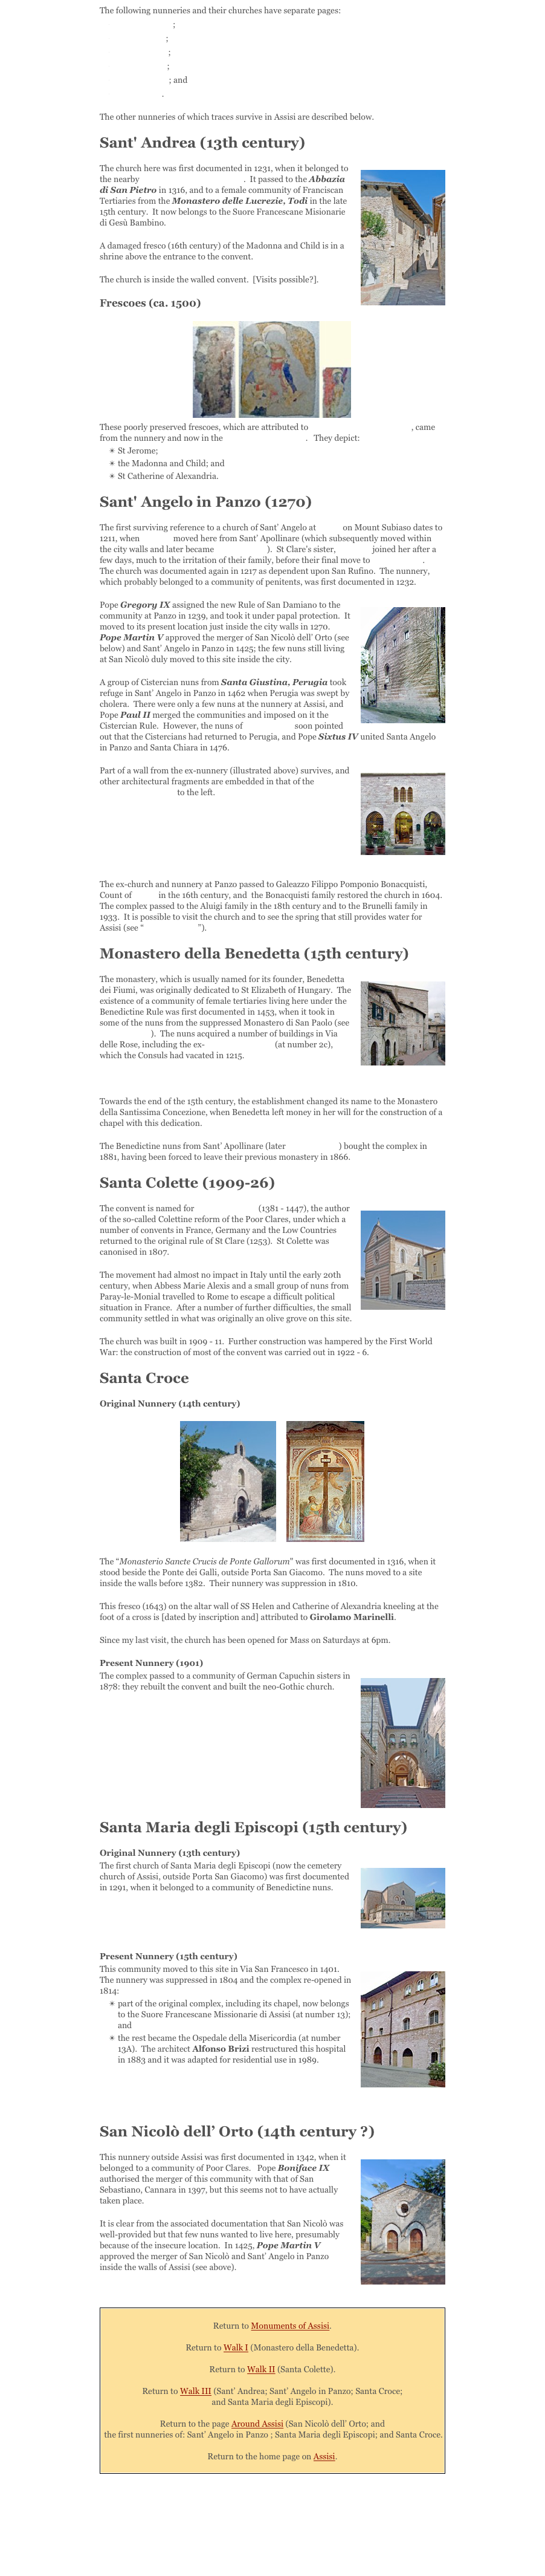 The following nunneries and their churches have separate pages: 
Santa Caterina; 
Santa Chiara; 
San Damiano; 
San Giacomo;
San Giuseppe; and 
San Quirico.
The other nunneries of which traces survive in Assisi are described below.
Sant' Andrea (13th century) 
￼The church here was first documented in 1231, when it belonged to the nearby San Giacomo di Murorupto.  It passed to the Abbazia di San Pietro in 1316, and to a female community of Franciscan Tertiaries from the Monastero delle Lucrezie, Todi in the late 15th century.  It now belongs to the Suore Francescane Misionarie di Gesù Bambino. A damaged fresco (16th century) of the Madonna and Child is in a shrine above the entrance to the convent.The church is inside the walled convent.  [Visits possible?].  
Frescoes (ca. 1500)￼ 
These poorly preserved frescoes, which are attributed to Andrea d' Assisi, l' Ingegno, came from the nunnery and now in the Pinacoteca Comunale.   They depict: 
St Jerome; 
the Madonna and Child; and 
St Catherine of Alexandria. 
Sant' Angelo in Panzo (1270) 
The first surviving reference to a church of Sant’ Angelo at Panzo on Mount Subiaso dates to 1211, when St Clare moved here from Sant’ Apollinare (which subsequently moved within the city walls and later became San Giuseppe).  St Clare's sister, St Agnes joined her after a few days, much to the irritation of their family, before their final move to San Damiano.   The church was documented again in 1217 as dependent upon San Rufino.  The nunnery, which probably belonged to a community of penitents, was first documented in 1232.￼Pope Gregory IX assigned the new Rule of San Damiano to the community at Panzo in 1239, and took it under papal protection.  It moved to its present location just inside the city walls in 1270.    Pope Martin V approved the merger of San Nicolò dell’ Orto (see below) and Sant’ Angelo in Panzo in 1425; the few nuns still living at San Nicolò duly moved to this site inside the city.  
A group of Cistercian nuns from Santa Giustina, Perugia took refuge in Sant’ Angelo in Panzo in 1462 when Perugia was swept by cholera.  There were only a few nuns at the nunnery at Assisi, and Pope Paul II merged the communities and imposed on it the Cistercian Rule.  However, the nuns of Santa Chiara soon pointed out that the Cistercians had returned to Perugia, and Pope Sixtus IV united Santa Angelo in Panzo and Santa Chiara in 1476. 
￼Part of a wall from the ex-nunnery (illustrated above) survives, and other architectural fragments are embedded in that of the Seminario Vescovile to the left. 



The ex-church and nunnery at Panzo passed to Galeazzo Filippo Pomponio Bonacquisti, Count of Panzo in the 16th century, and  the Bonacquisti family restored the church in 1604.  The complex passed to the Aluigi family in the 18th century and to the Brunelli family in 1933.  It is possible to visit the church and to see the spring that still provides water for Assisi (see “ Around Assisi”). 
Monastero della Benedetta (15th century) 
￼The monastery, which is usually named for its founder, Benedetta dei Fiumi, was originally dedicated to St Elizabeth of Hungary.  The existence of a community of female tertiaries living here under the Benedictine Rule was first documented in 1453, when it took in some of the nuns from the suppressed Monastero di San Paolo (see San Giuseppe).  The nuns acquired a number of buildings in Via delle Rose, including the ex-Palazzo Consulare (at number 2c), which the Consuls had vacated in 1215.
Towards the end of the 15th century, the establishment changed its name to the Monastero della Santissima Concezione, when Benedetta left money in her will for the construction of a chapel with this dedication.  The Benedictine nuns from Sant’ Apollinare (later San Giuseppe) bought the complex in 1881, having been forced to leave their previous monastery in 1866.  
Santa Colette (1909-26) 
￼The convent is named for St Colette Boilet (1381 - 1447), the author of the so-called Colettine reform of the Poor Clares, under which a number of convents in France, Germany and the Low Countries returned to the original rule of St Clare (1253).  St Colette was canonised in 1807.
The movement had almost no impact in Italy until the early 20th century, when Abbess Marie Alexis and a small group of nuns from Paray-le-Monial travelled to Rome to escape a difficult political situation in France.  After a number of further difficulties, the small community settled in what was originally an olive grove on this site. The church was built in 1909 - 11.  Further construction was hampered by the First World War: the construction of most of the convent was carried out in 1922 - 6.
Santa Croce 
Original Nunnery (14th century) 
￼     ￼
The “Monasterio Sancte Crucis de Ponte Gallorum" was first documented in 1316, when it stood beside the Ponte dei Galli, outside Porta San Giacomo.  The nuns moved to a site inside the walls before 1382.  Their nunnery was suppression in 1810.  
This fresco (1643) on the altar wall of SS Helen and Catherine of Alexandria kneeling at the foot of a cross is [dated by inscription and] attributed to Girolamo Marinelli. 
Since my last visit, the church has been opened for Mass on Saturdays at 6pm.
Present Nunnery (1901) 
￼The complex passed to a community of German Capuchin sisters in 1878: they rebuilt the convent and built the neo-Gothic church. 





Santa Maria degli Episcopi (15th century) 
Original Nunnery (13th century) 
￼The first church of Santa Maria degli Episcopi (now the cemetery church of Assisi, outside Porta San Giacomo) was first documented in 1291, when it belonged to a community of Benedictine nuns. 


Present Nunnery (15th century) 
￼This community moved to this site in Via San Francesco in 1401.  The nunnery was suppressed in 1804 and the complex re-opened in 1814: 
part of the original complex, including its chapel, now belongs to the Suore Francescane Missionarie di Assisi (at number 13); and 
the rest became the Ospedale della Misericordia (at number 13A).  The architect Alfonso Brizi restructured this hospital in 1883 and it was adapted for residential use in 1989.    


San Nicolò dell’ Orto (14th century ?) 
￼This nunnery outside Assisi was first documented in 1342, when it belonged to a community of Poor Clares.   Pope Boniface IX authorised the merger of this community with that of San Sebastiano, Cannara in 1397, but this seems not to have actually taken place.  
It is clear from the associated documentation that San Nicolò was well-provided but that few nuns wanted to live here, presumably because of the insecure location.  In 1425, Pope Martin V approved the merger of San Nicolò and Sant’ Angelo in Panzo inside the walls of Assisi (see above). 

￼